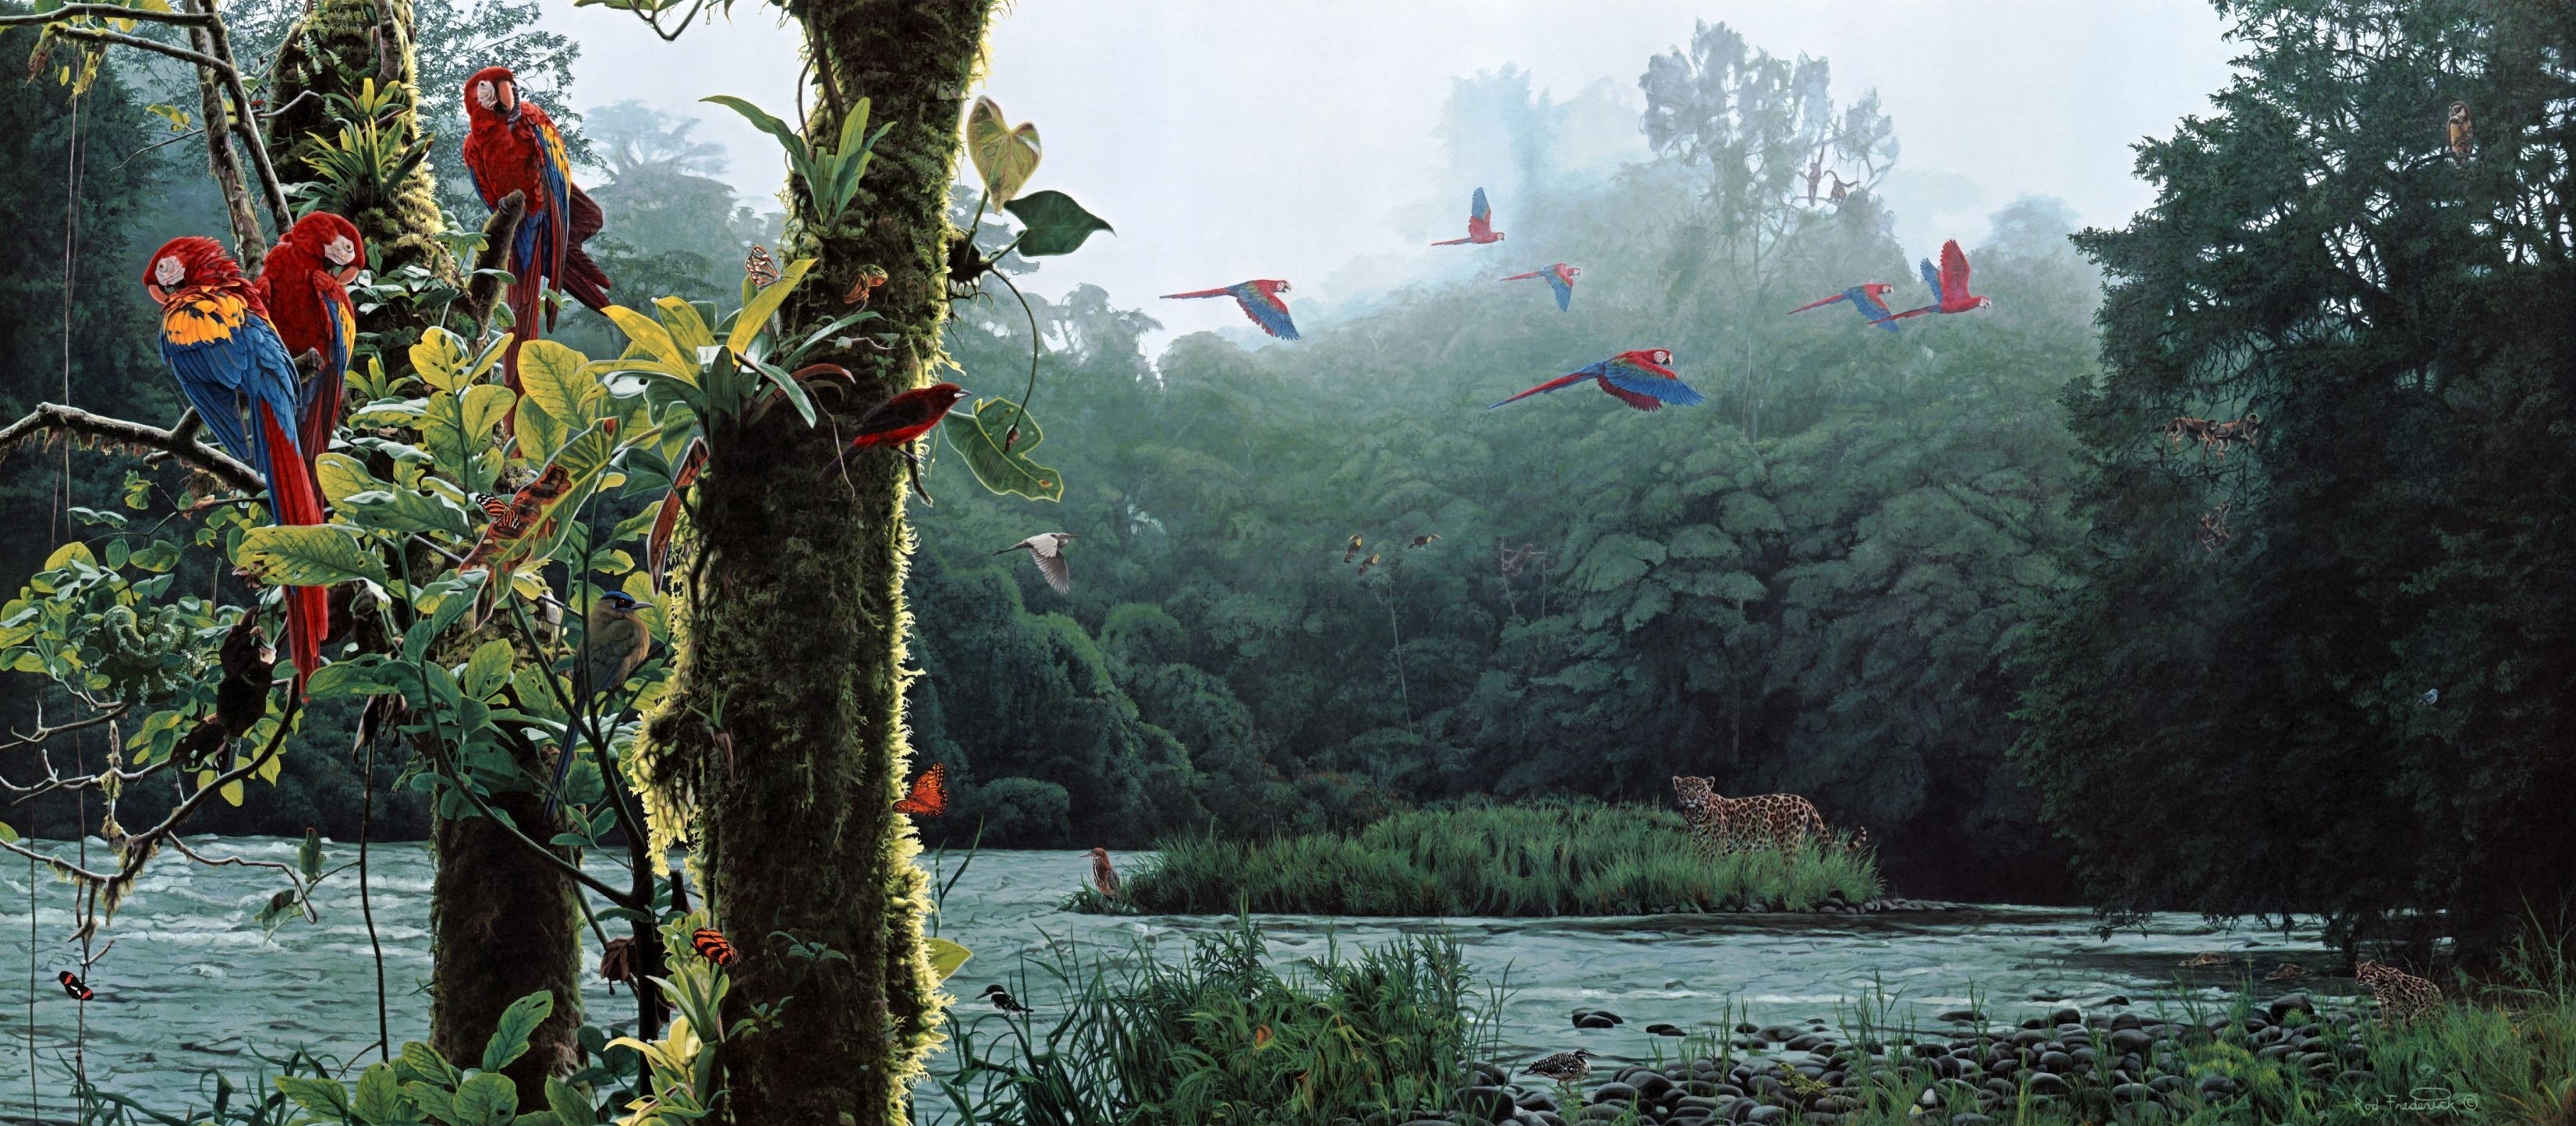 Birds: Parrot Landscapes Birds Paintings Flying Forest Jungle Rivers ...